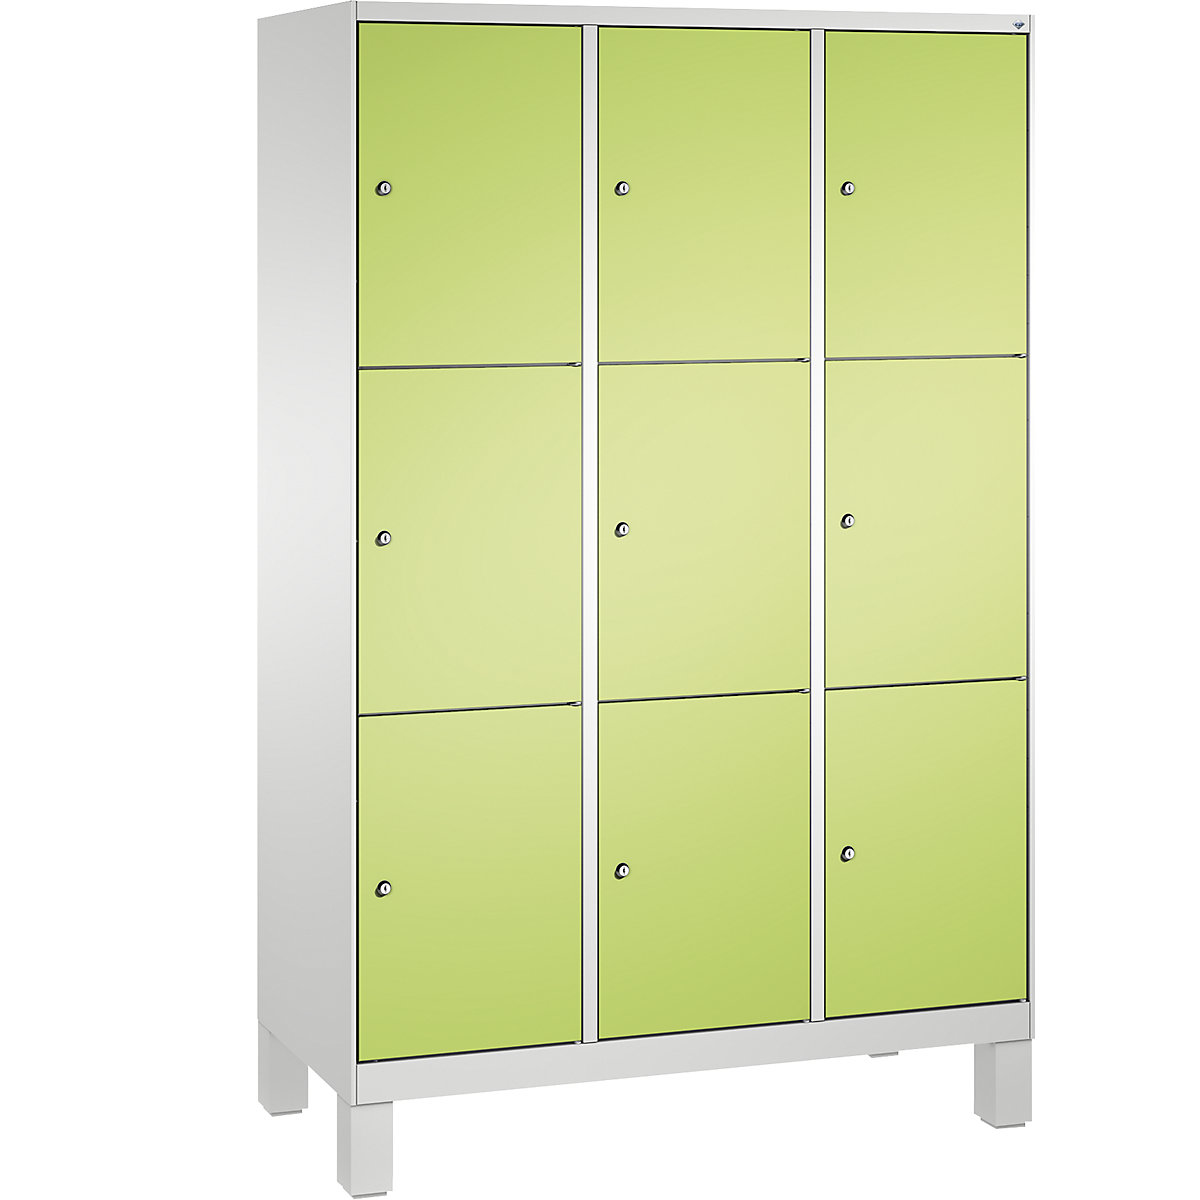 EVOLO locker unit, with feet – C+P, 3 compartments, 3 shelf compartments each, compartment width 400 mm, light grey / viridian green-8